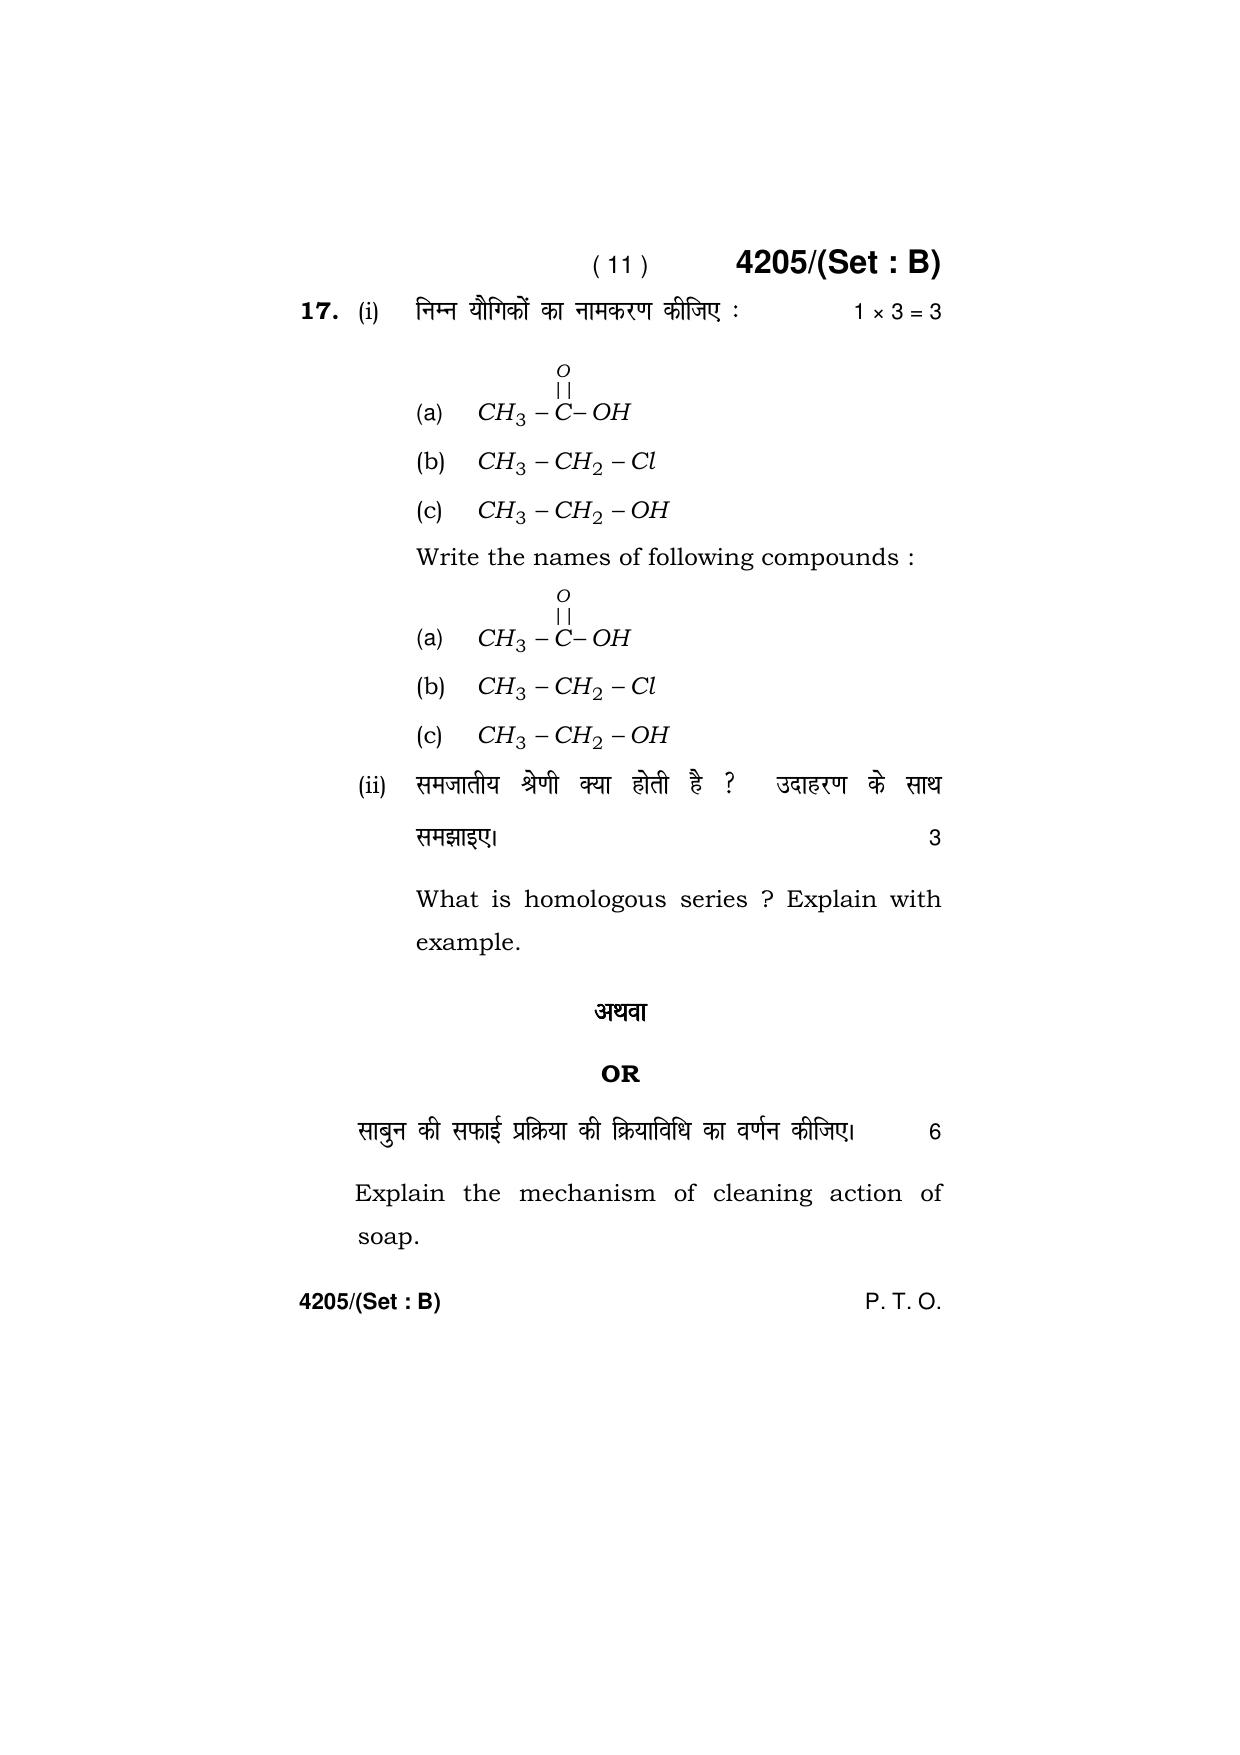 Haryana Board HBSE Class 10 Science (All Set) 2019 Question Paper - Page 27